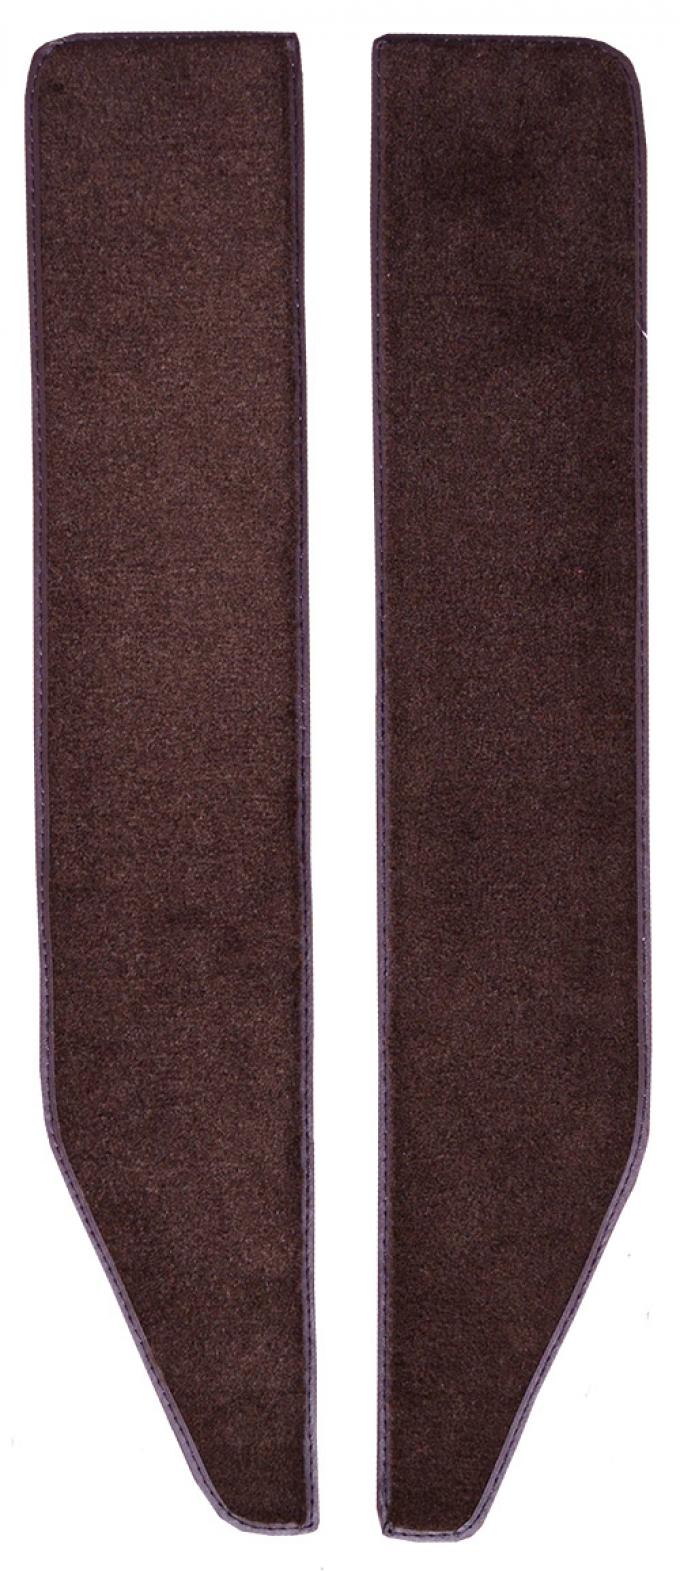 ACC 1975-1979 Ford F-350 Door Panel Inserts with Cardboard 2pc Cutpile Carpet